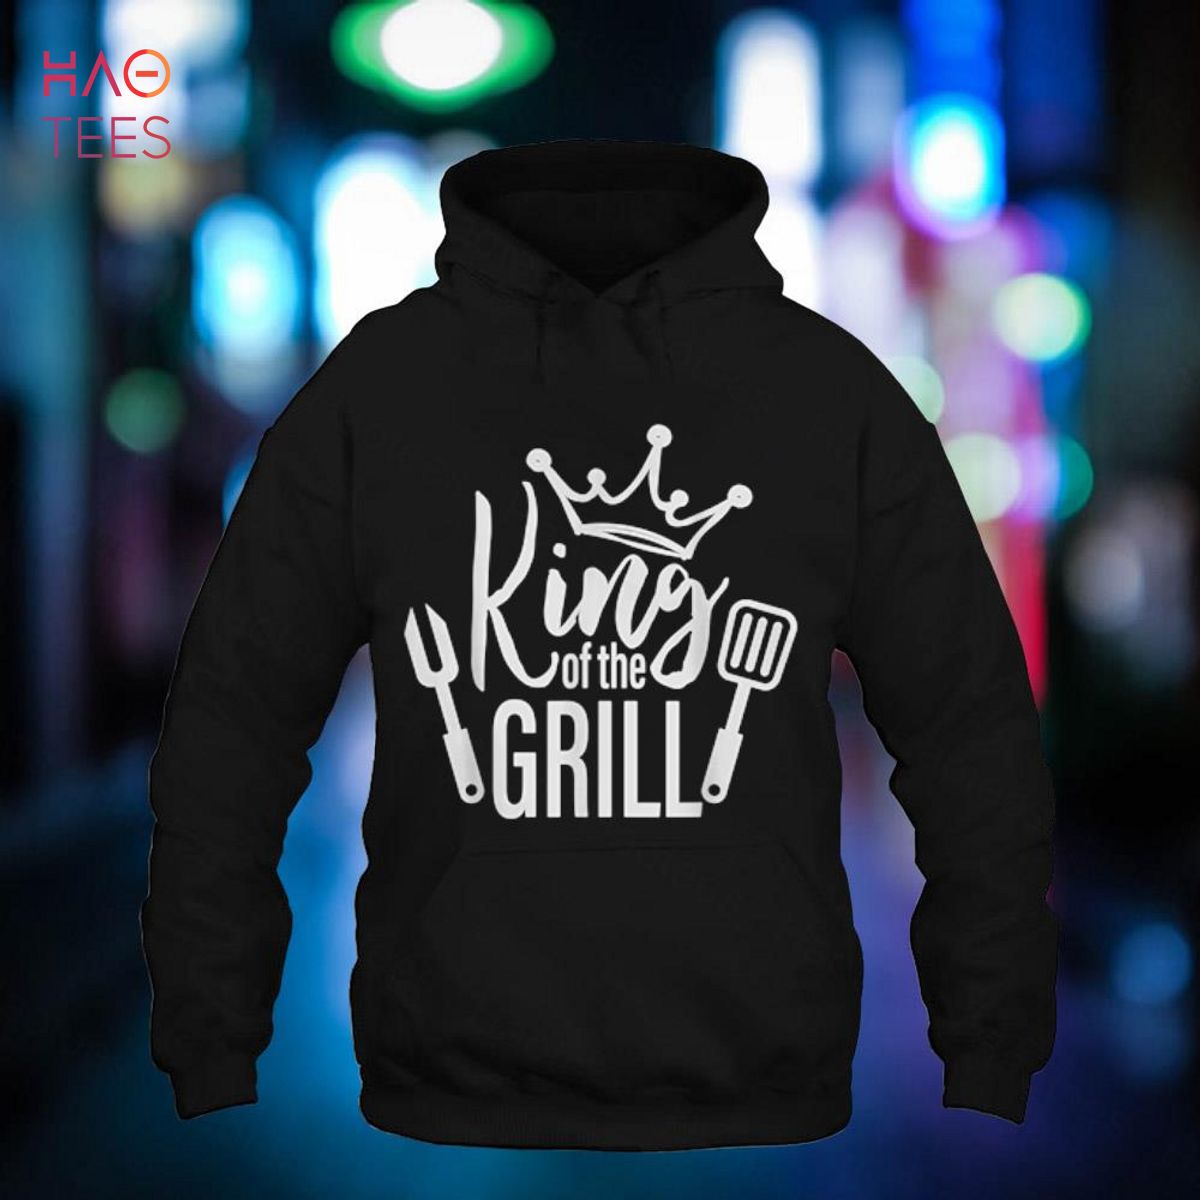 Funny Hoodie With BBQ Sayings, Meat Smoker Sweatshirt for Grillers